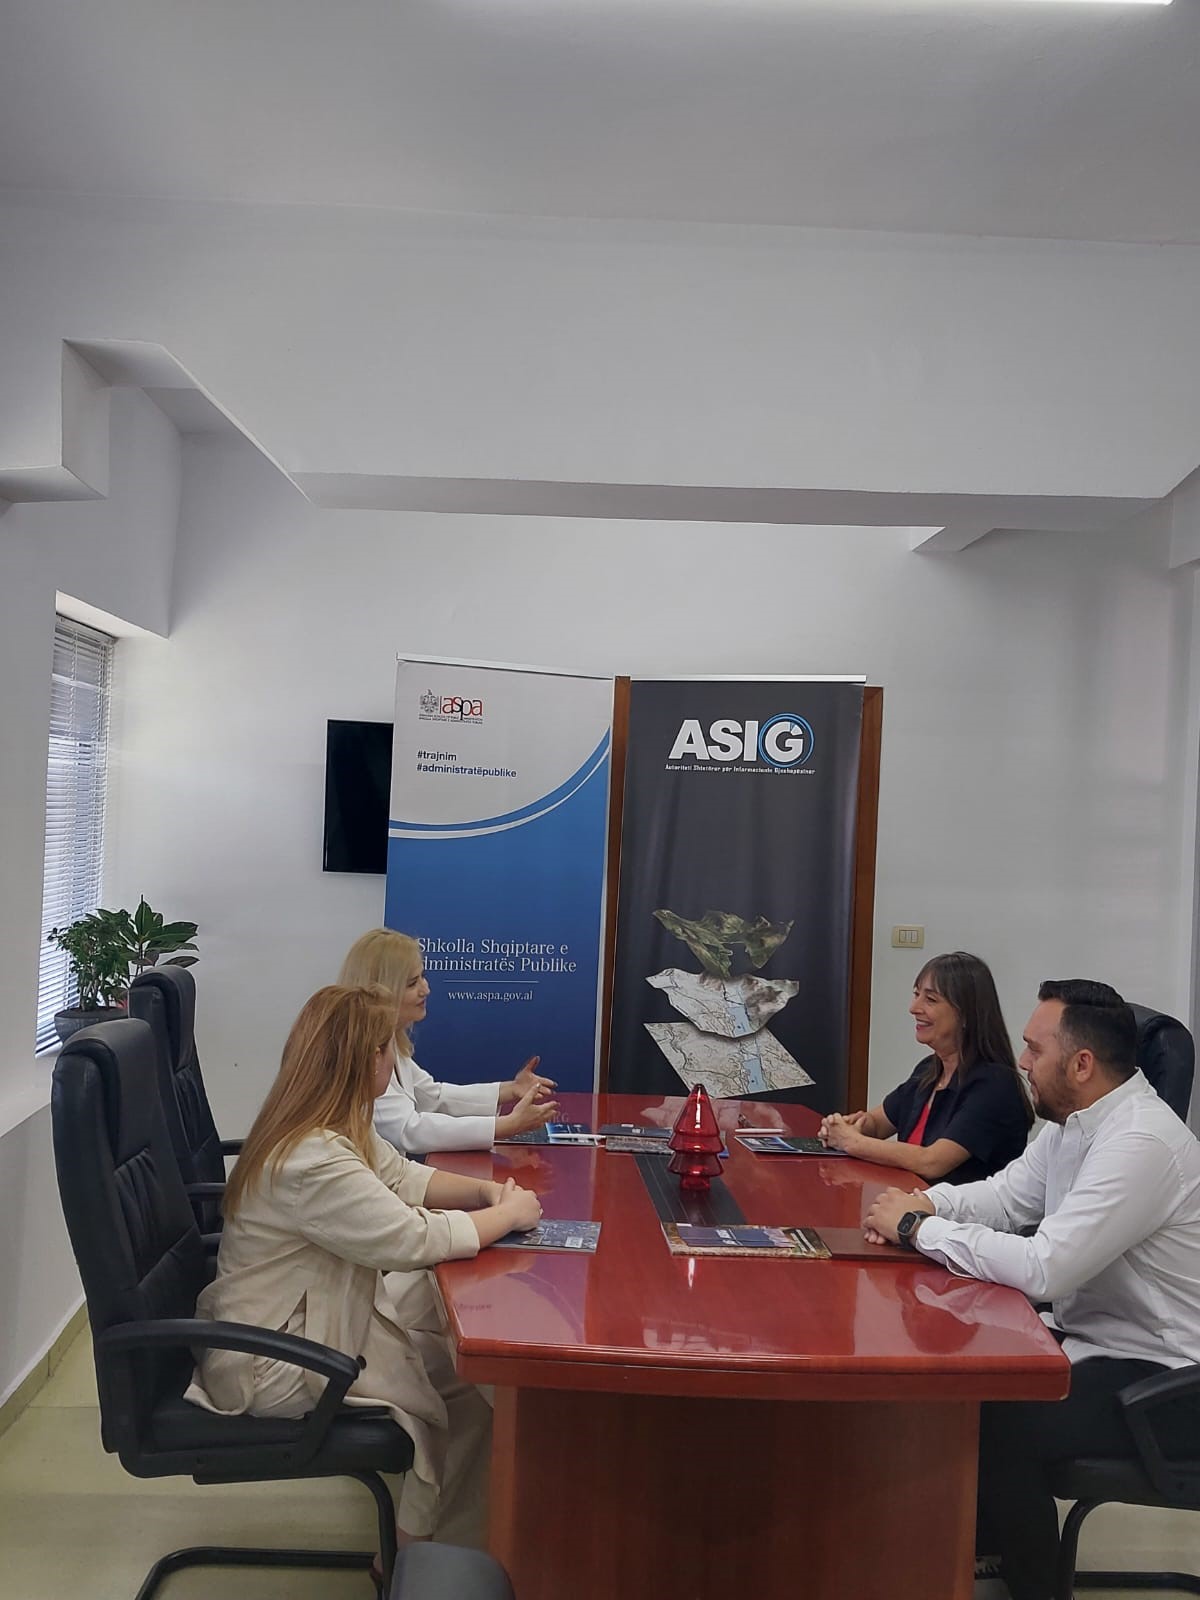 Agreement between ASIG and ASPA is signed